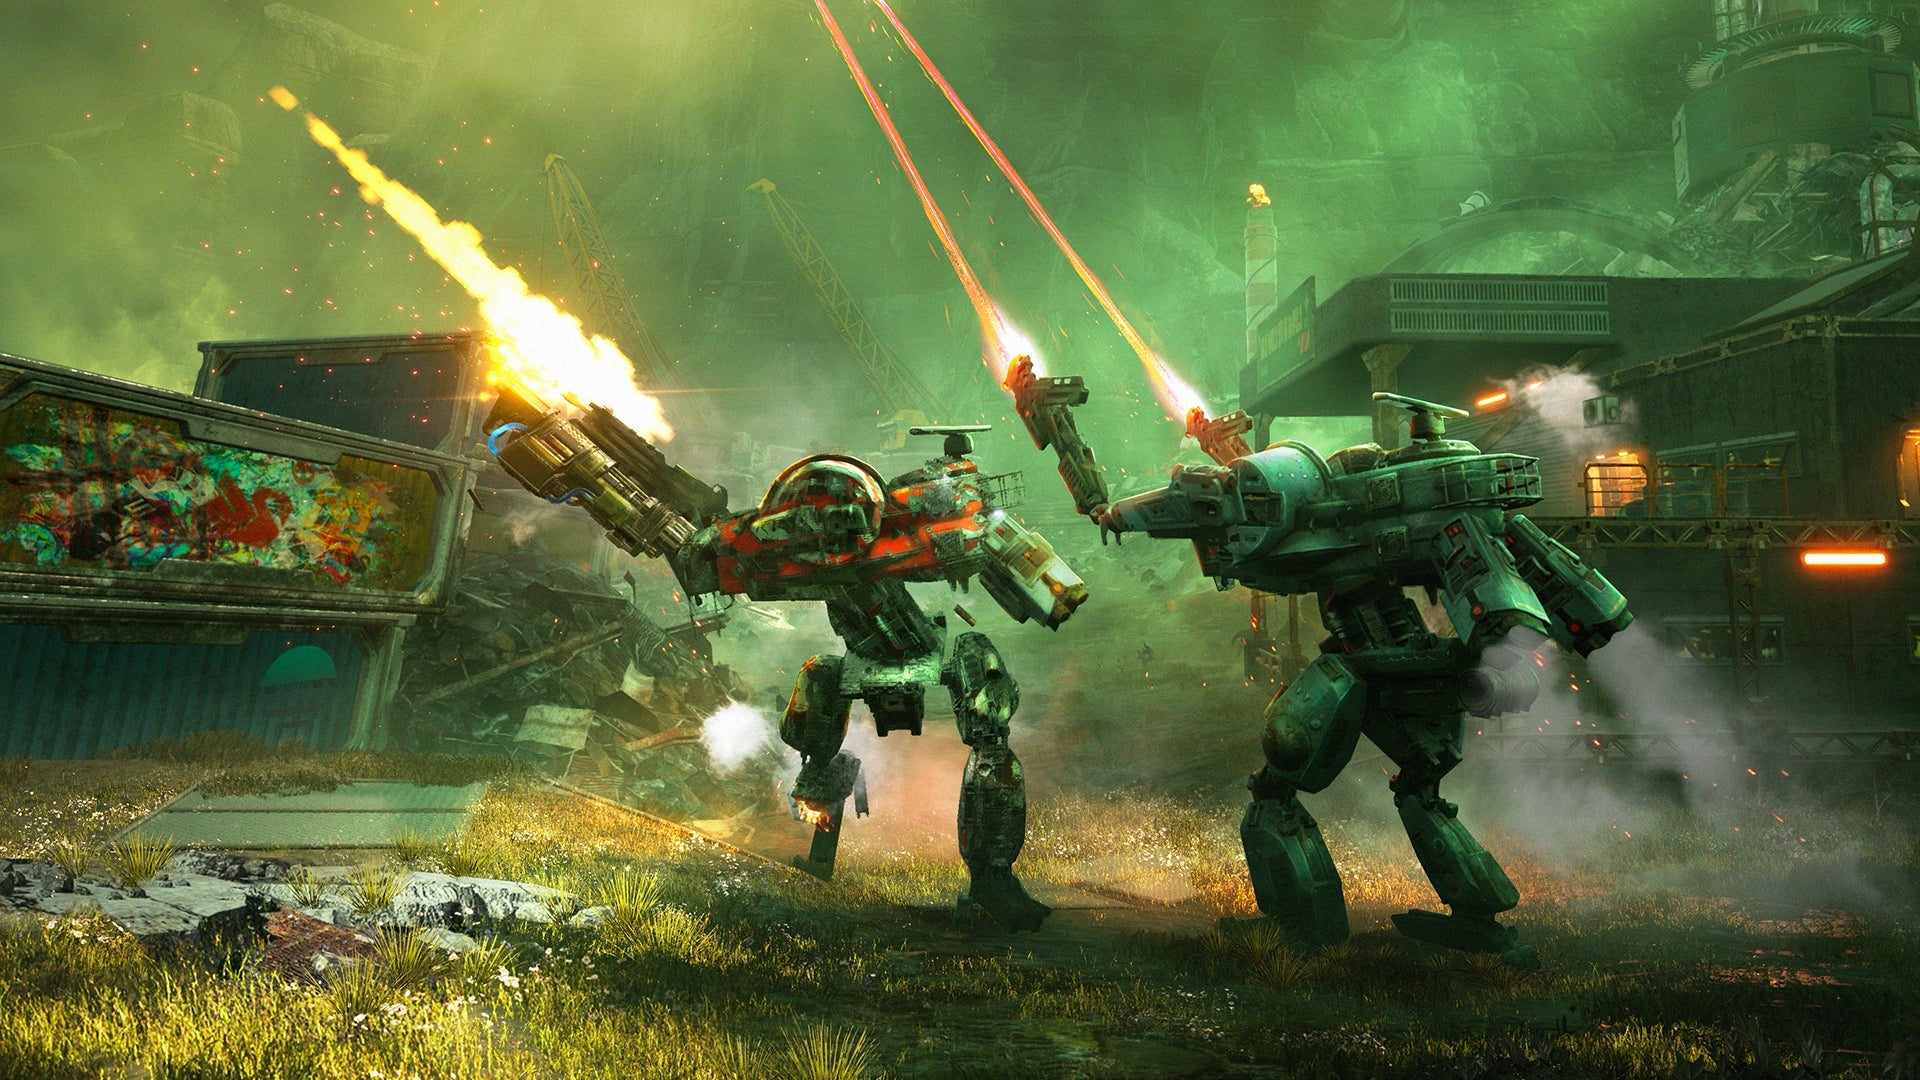 Canned multiplayer mech shooter Hawken being revived as PvE game Eurogamer